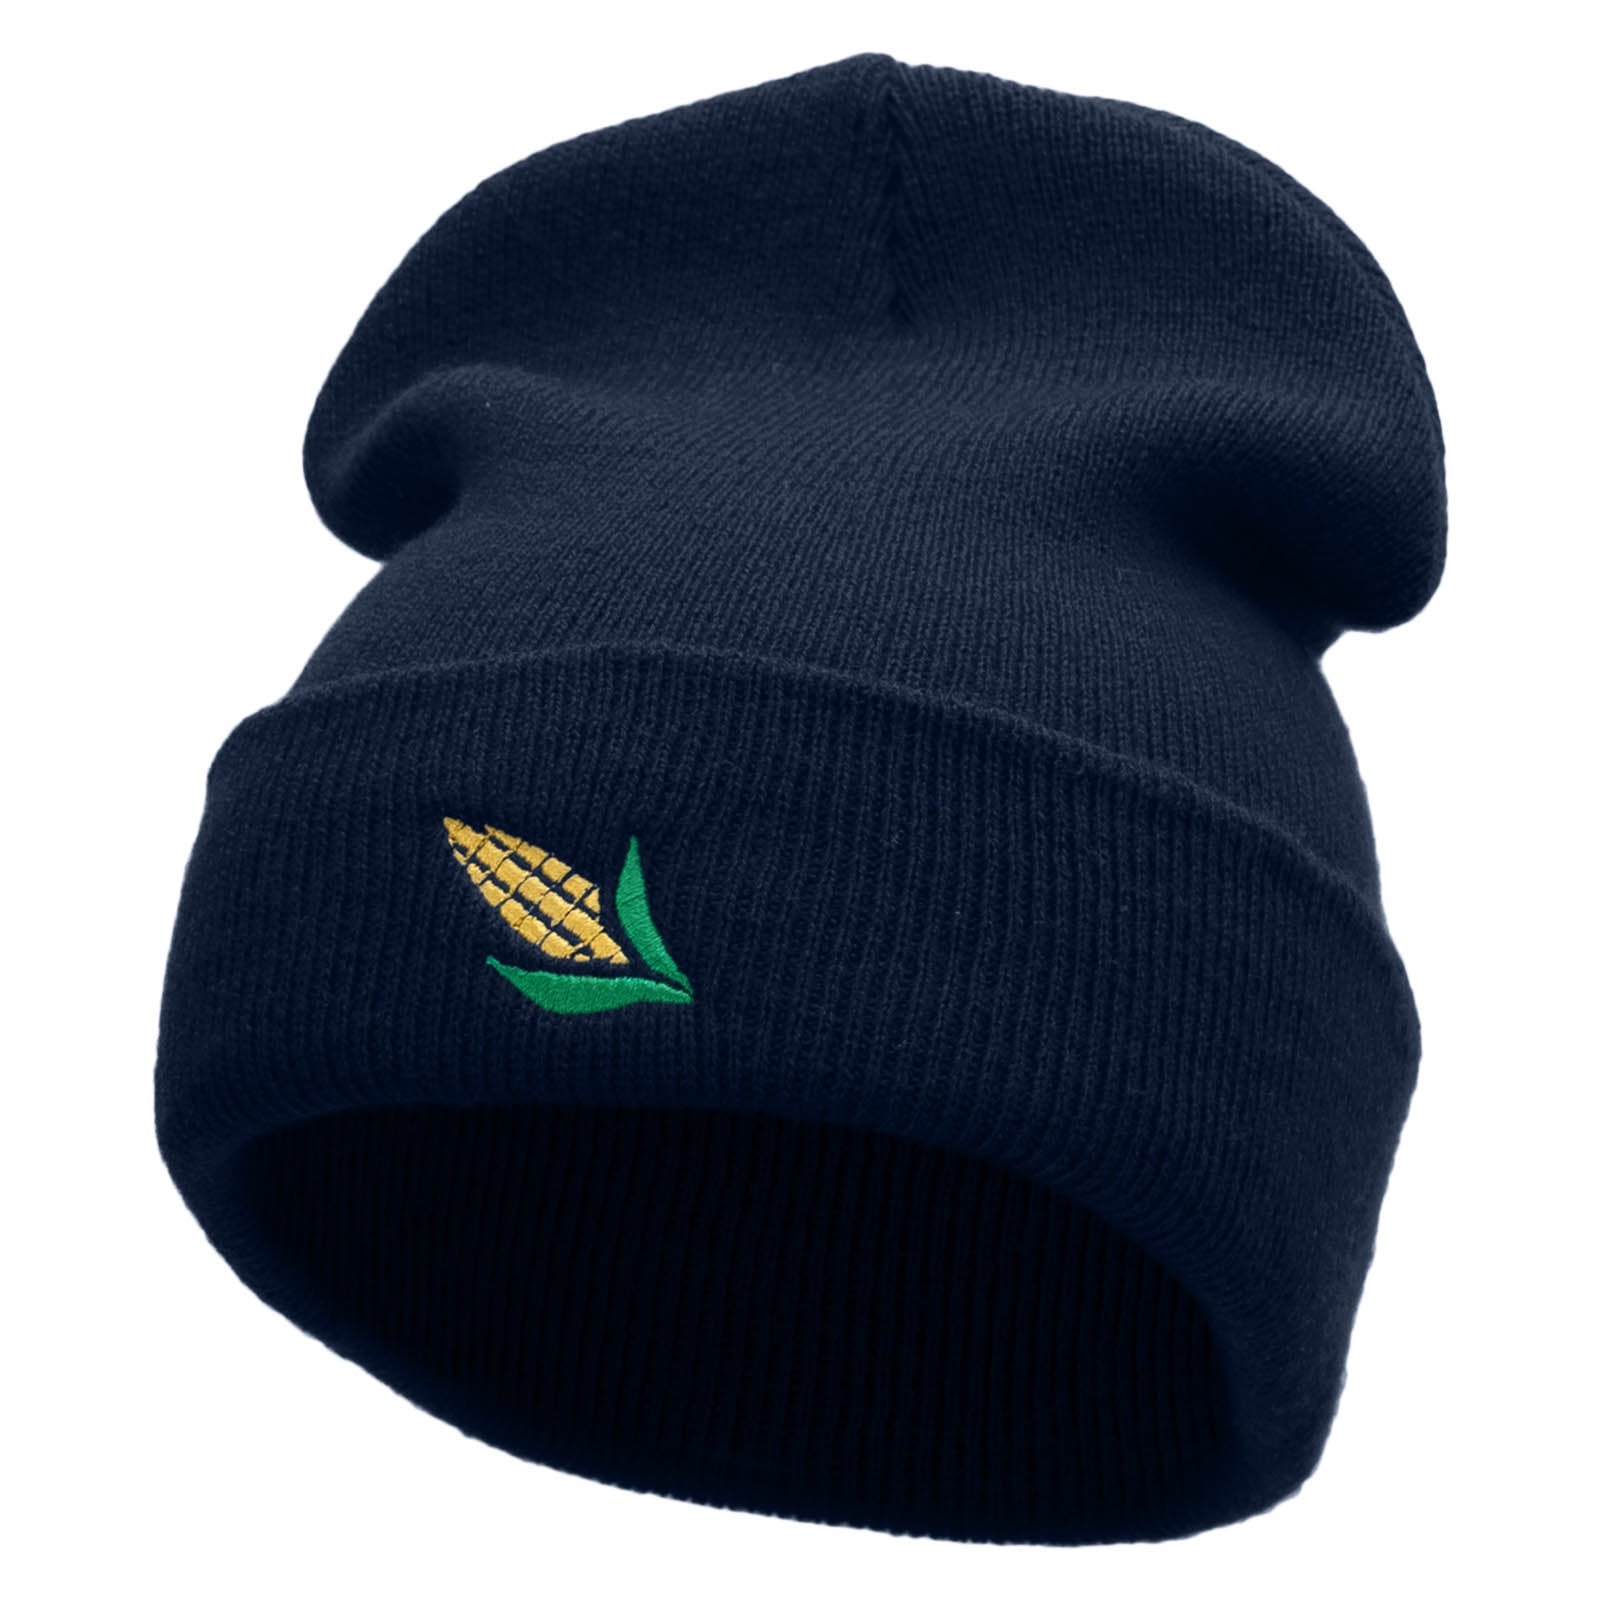 Corn Cob Embroidered 12 Inch Solid Long Beanie Made in USA - Navy OSFM